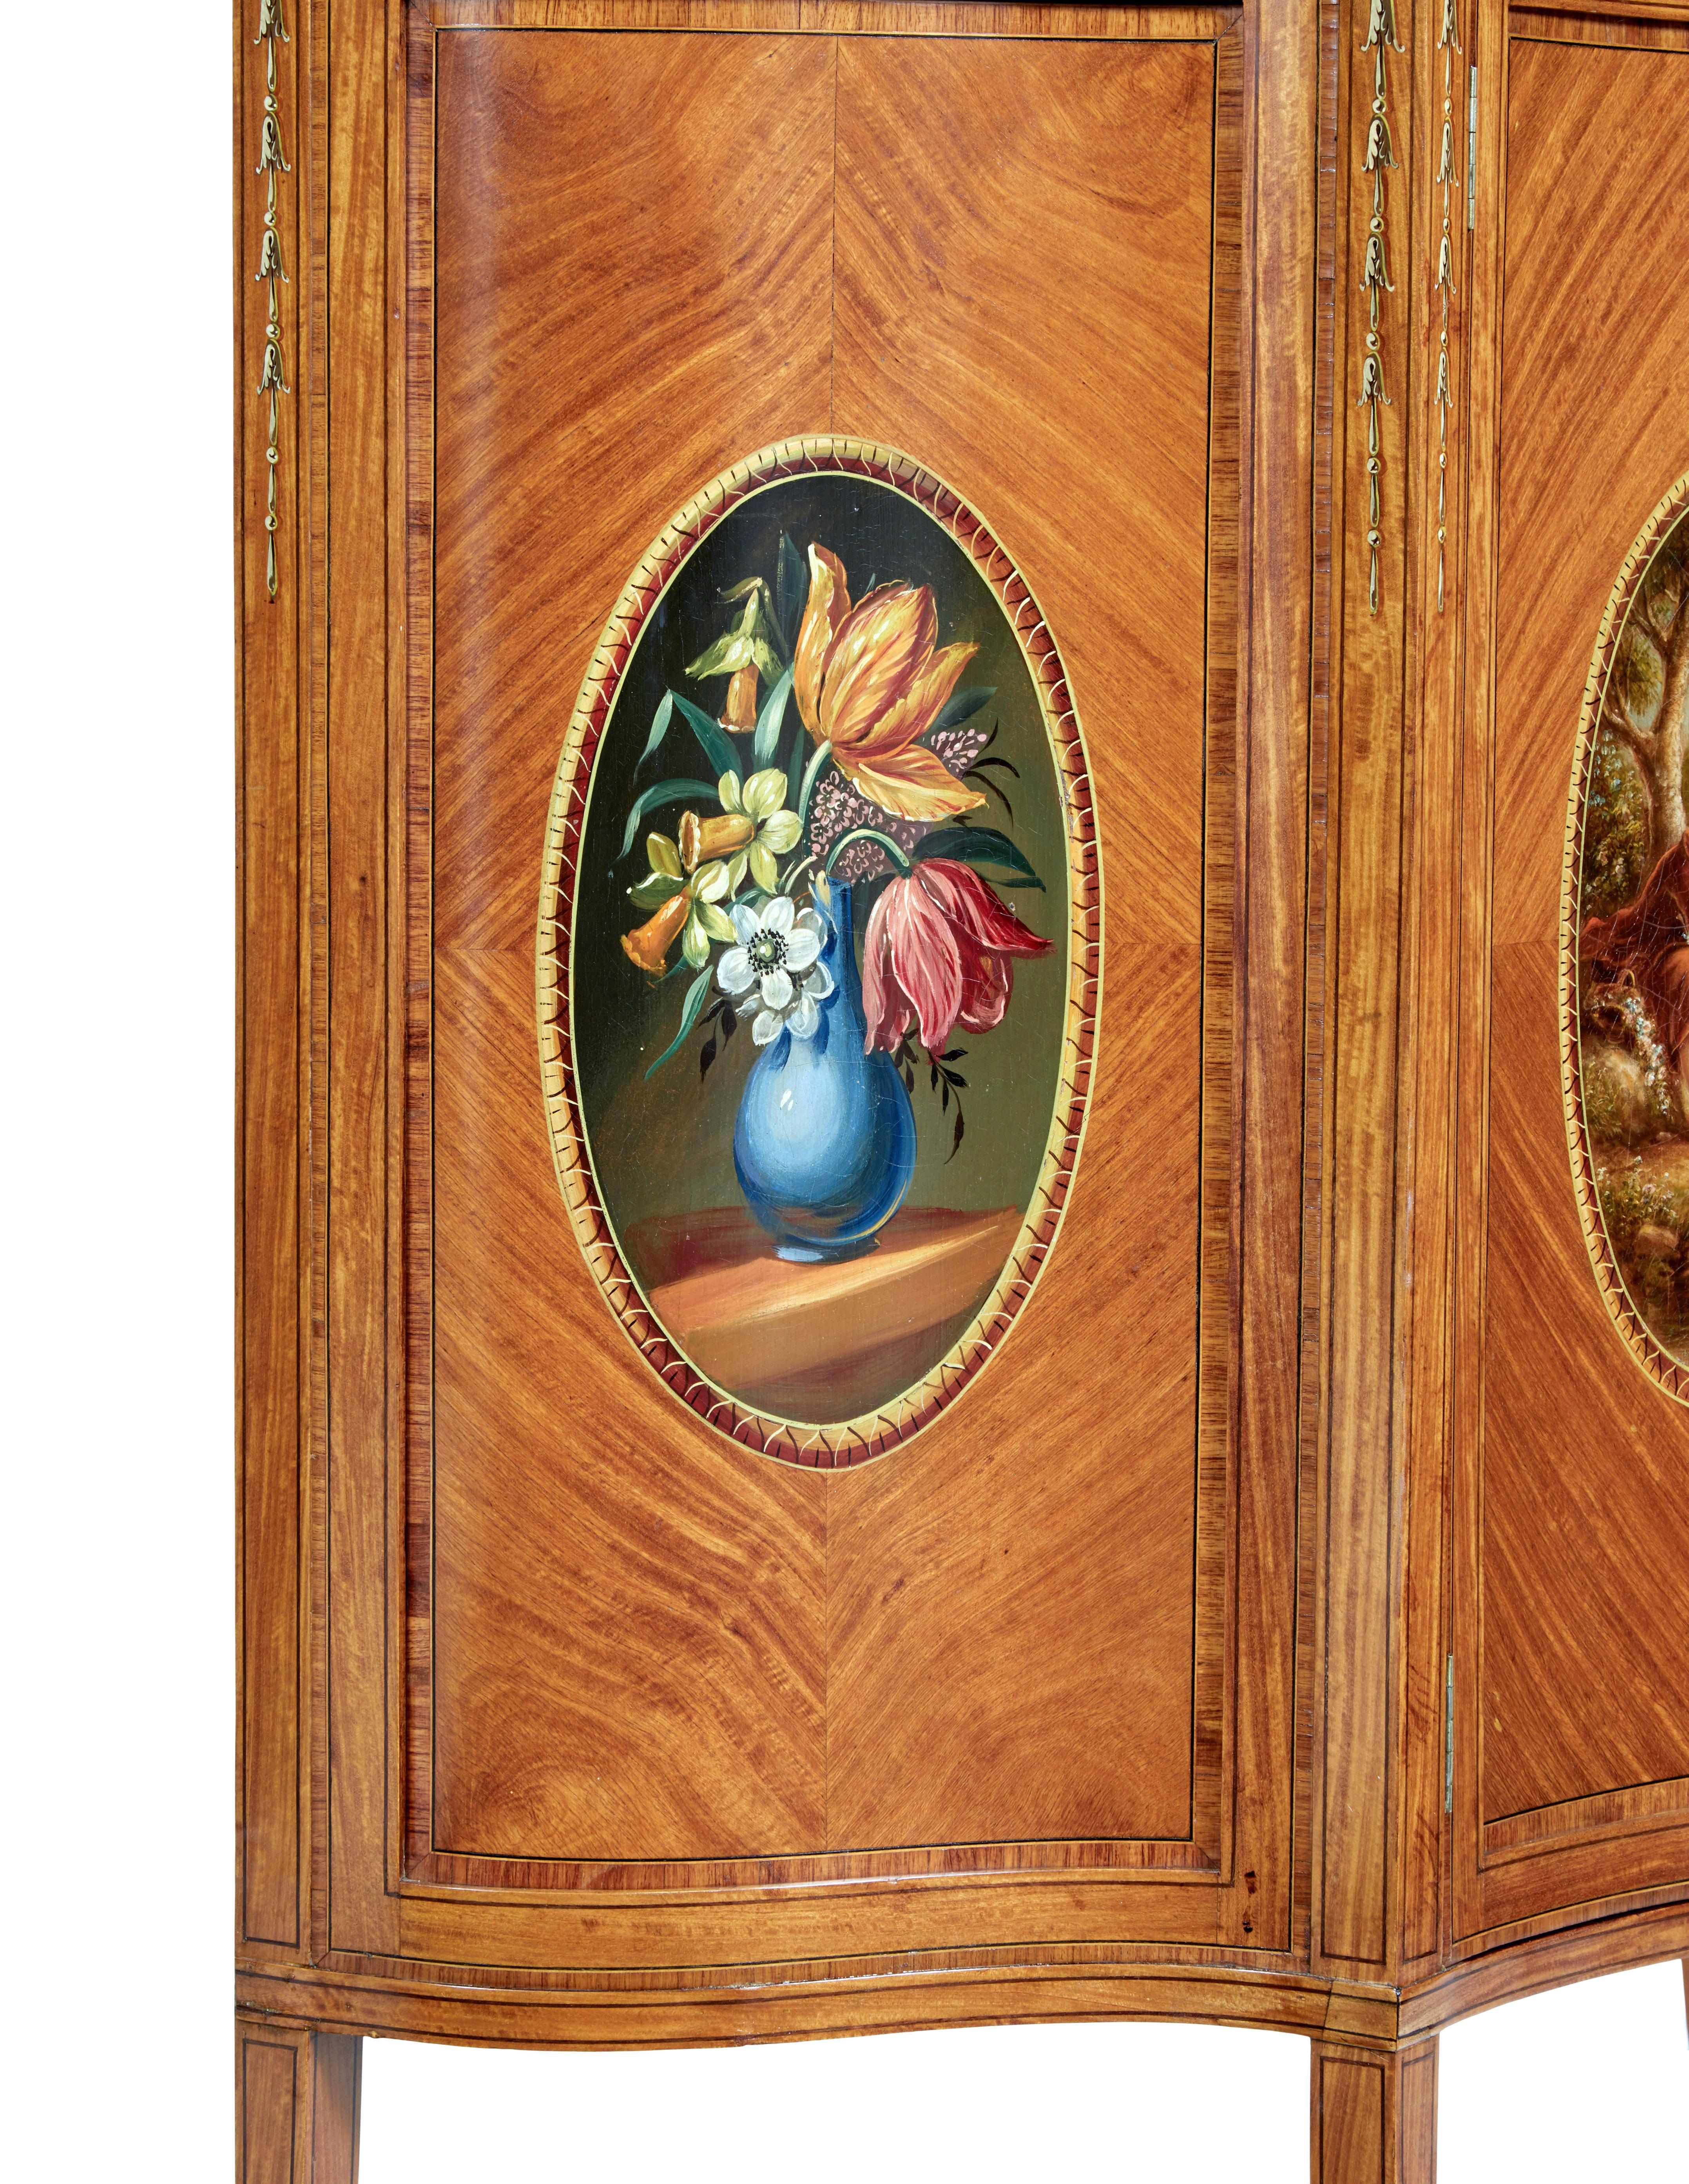 Late 19th Century Sheraton Revival Satinwood Inlaid and Painted Cabinet For Sale 1